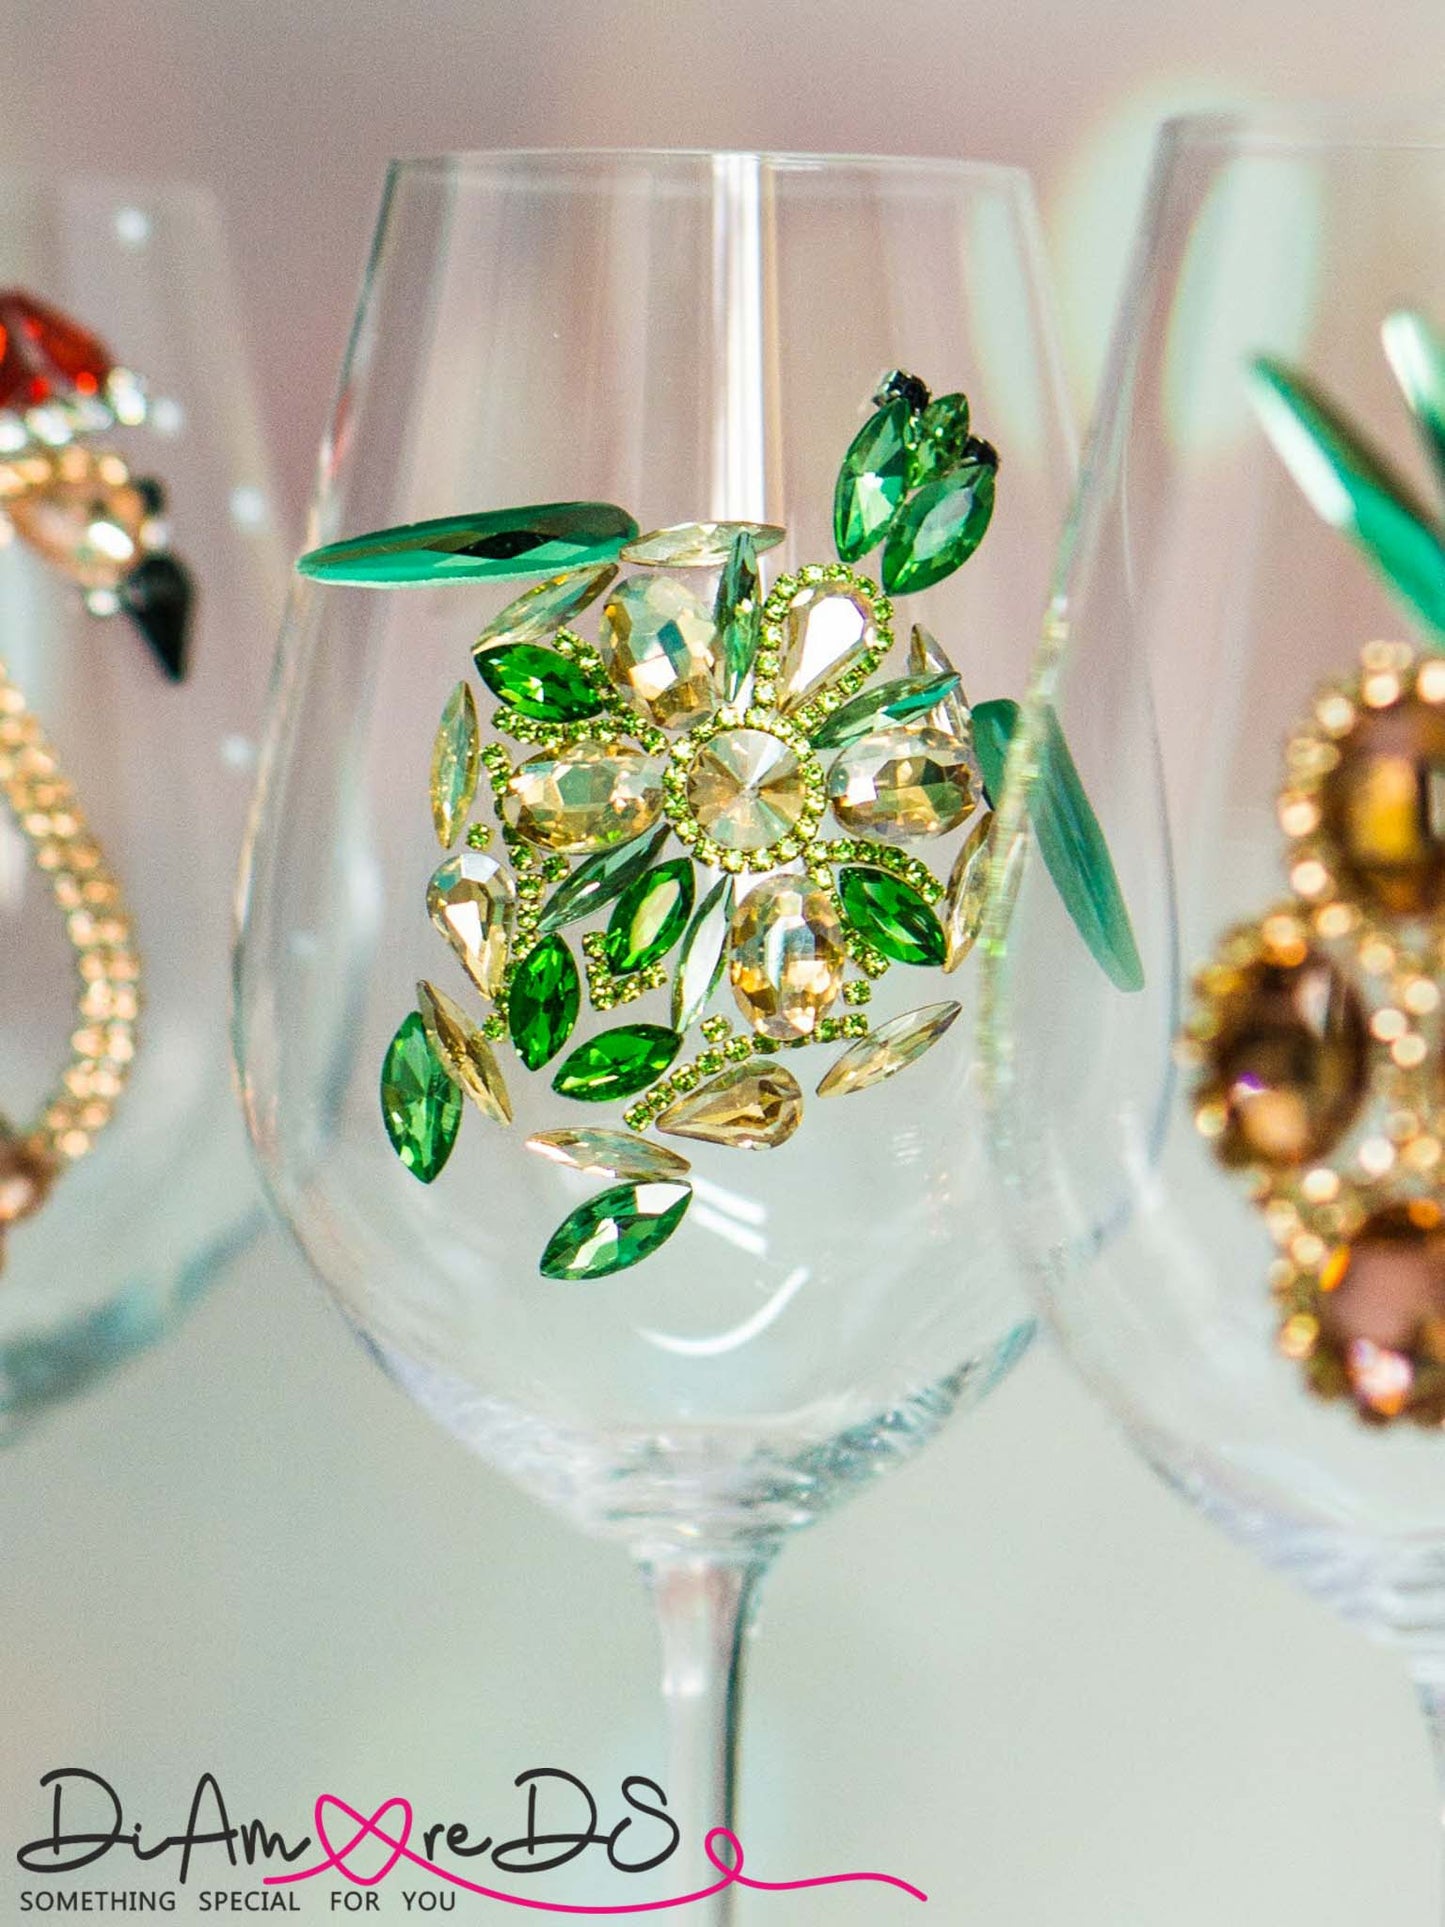 Exquisite hand-decorated wine glass with a sea turtle theme, a unique gift for tropical decor enthusiasts.